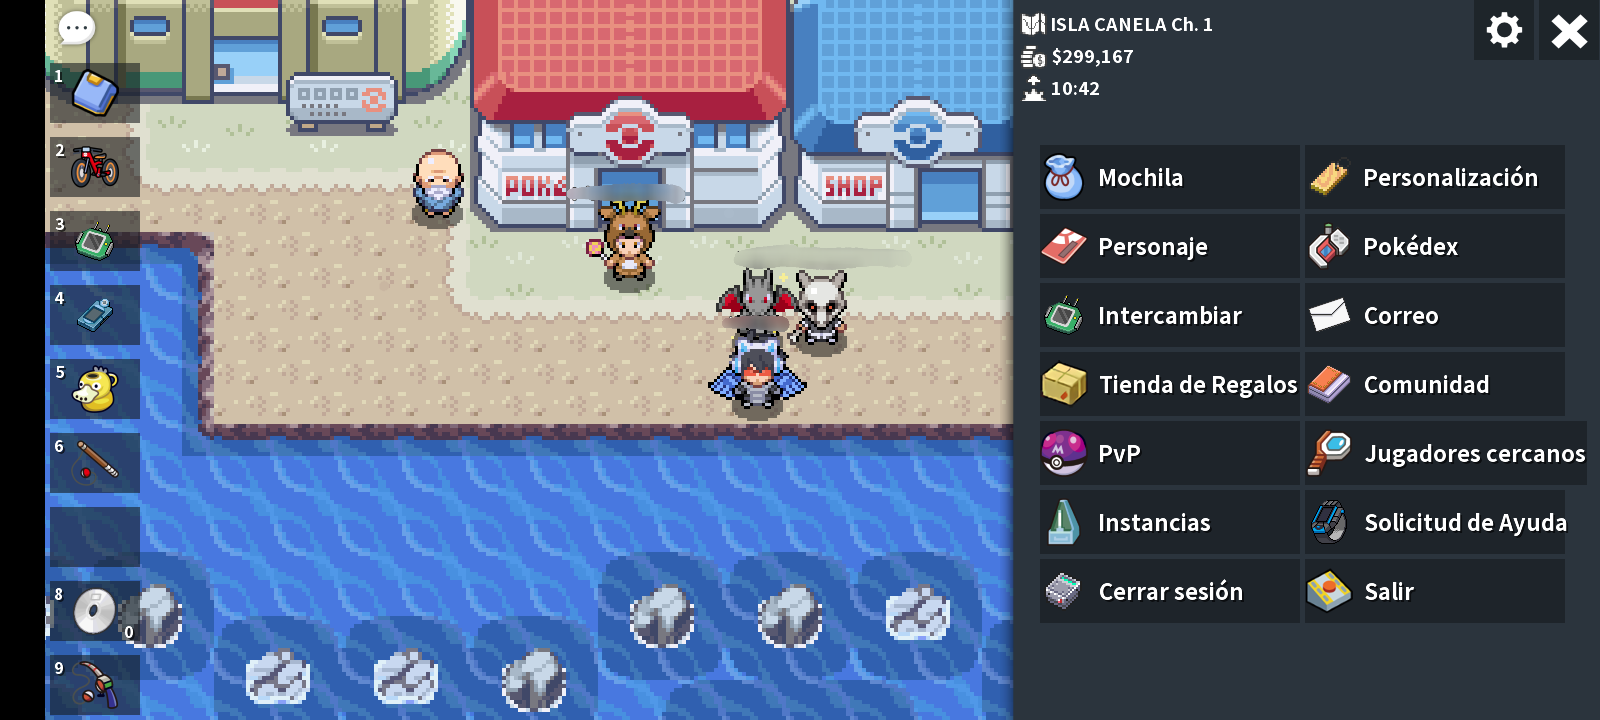 Android/Pc Client Revamped Mod - Client Customization - PokeMMO